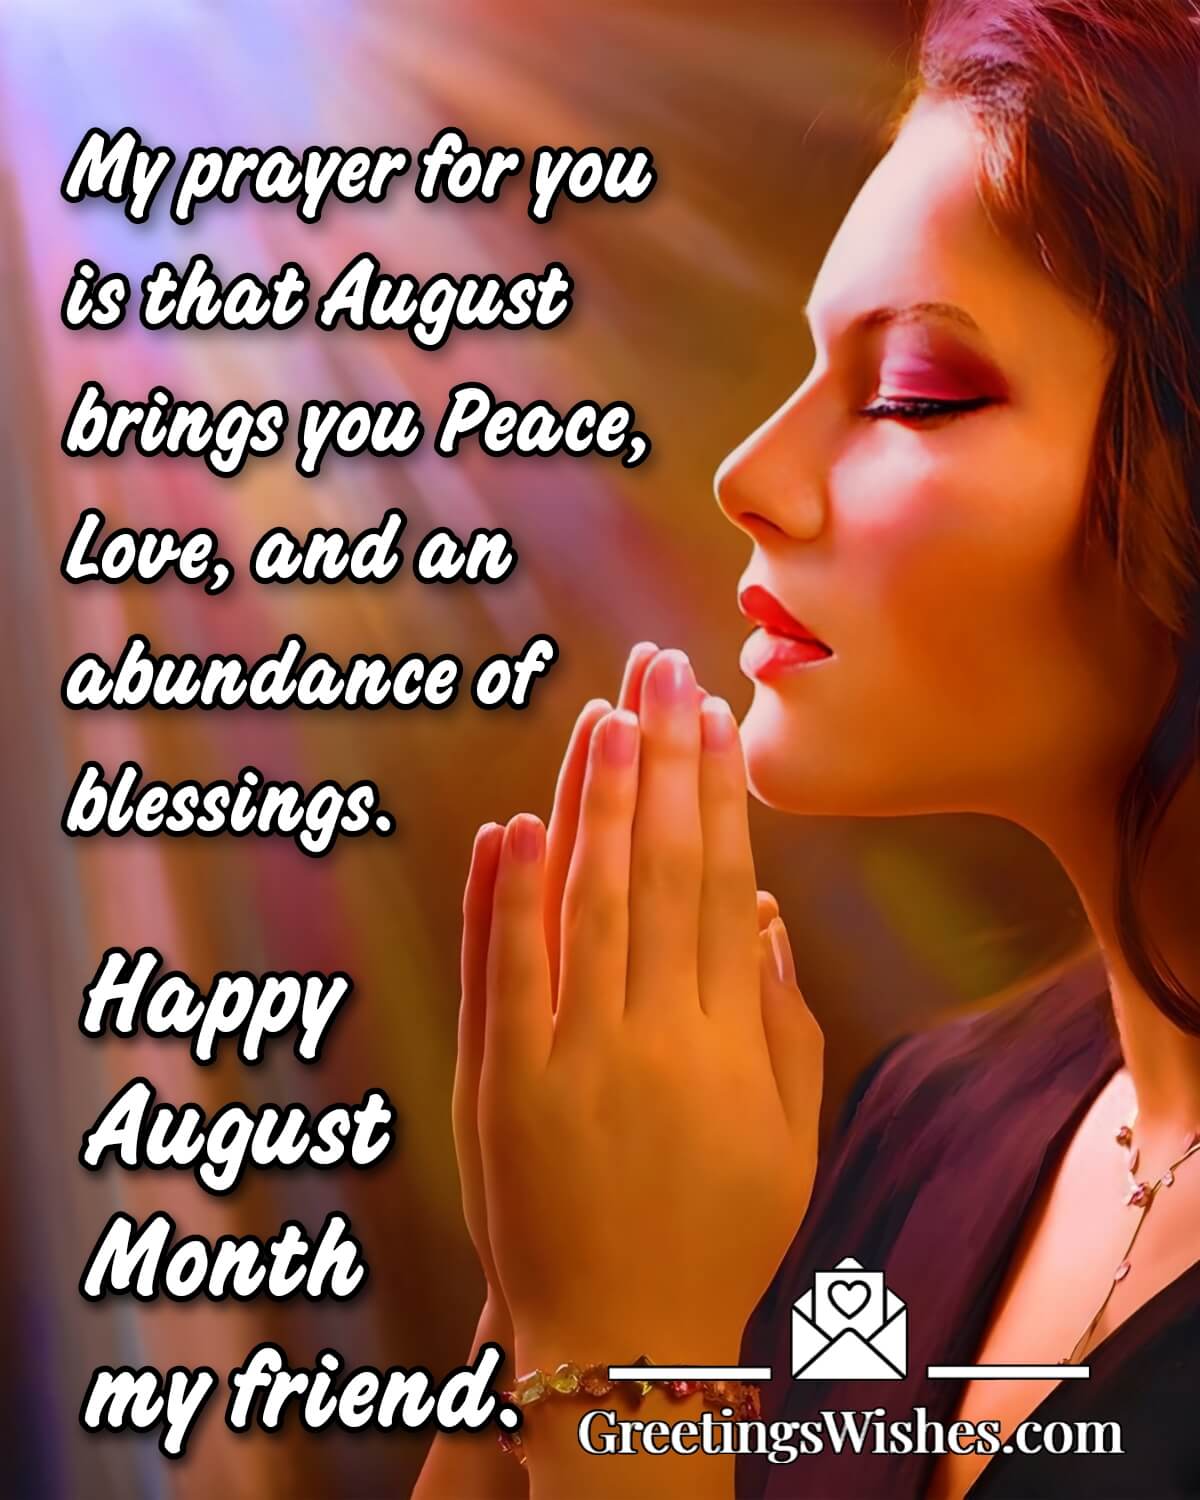 Happy August Month Blessings